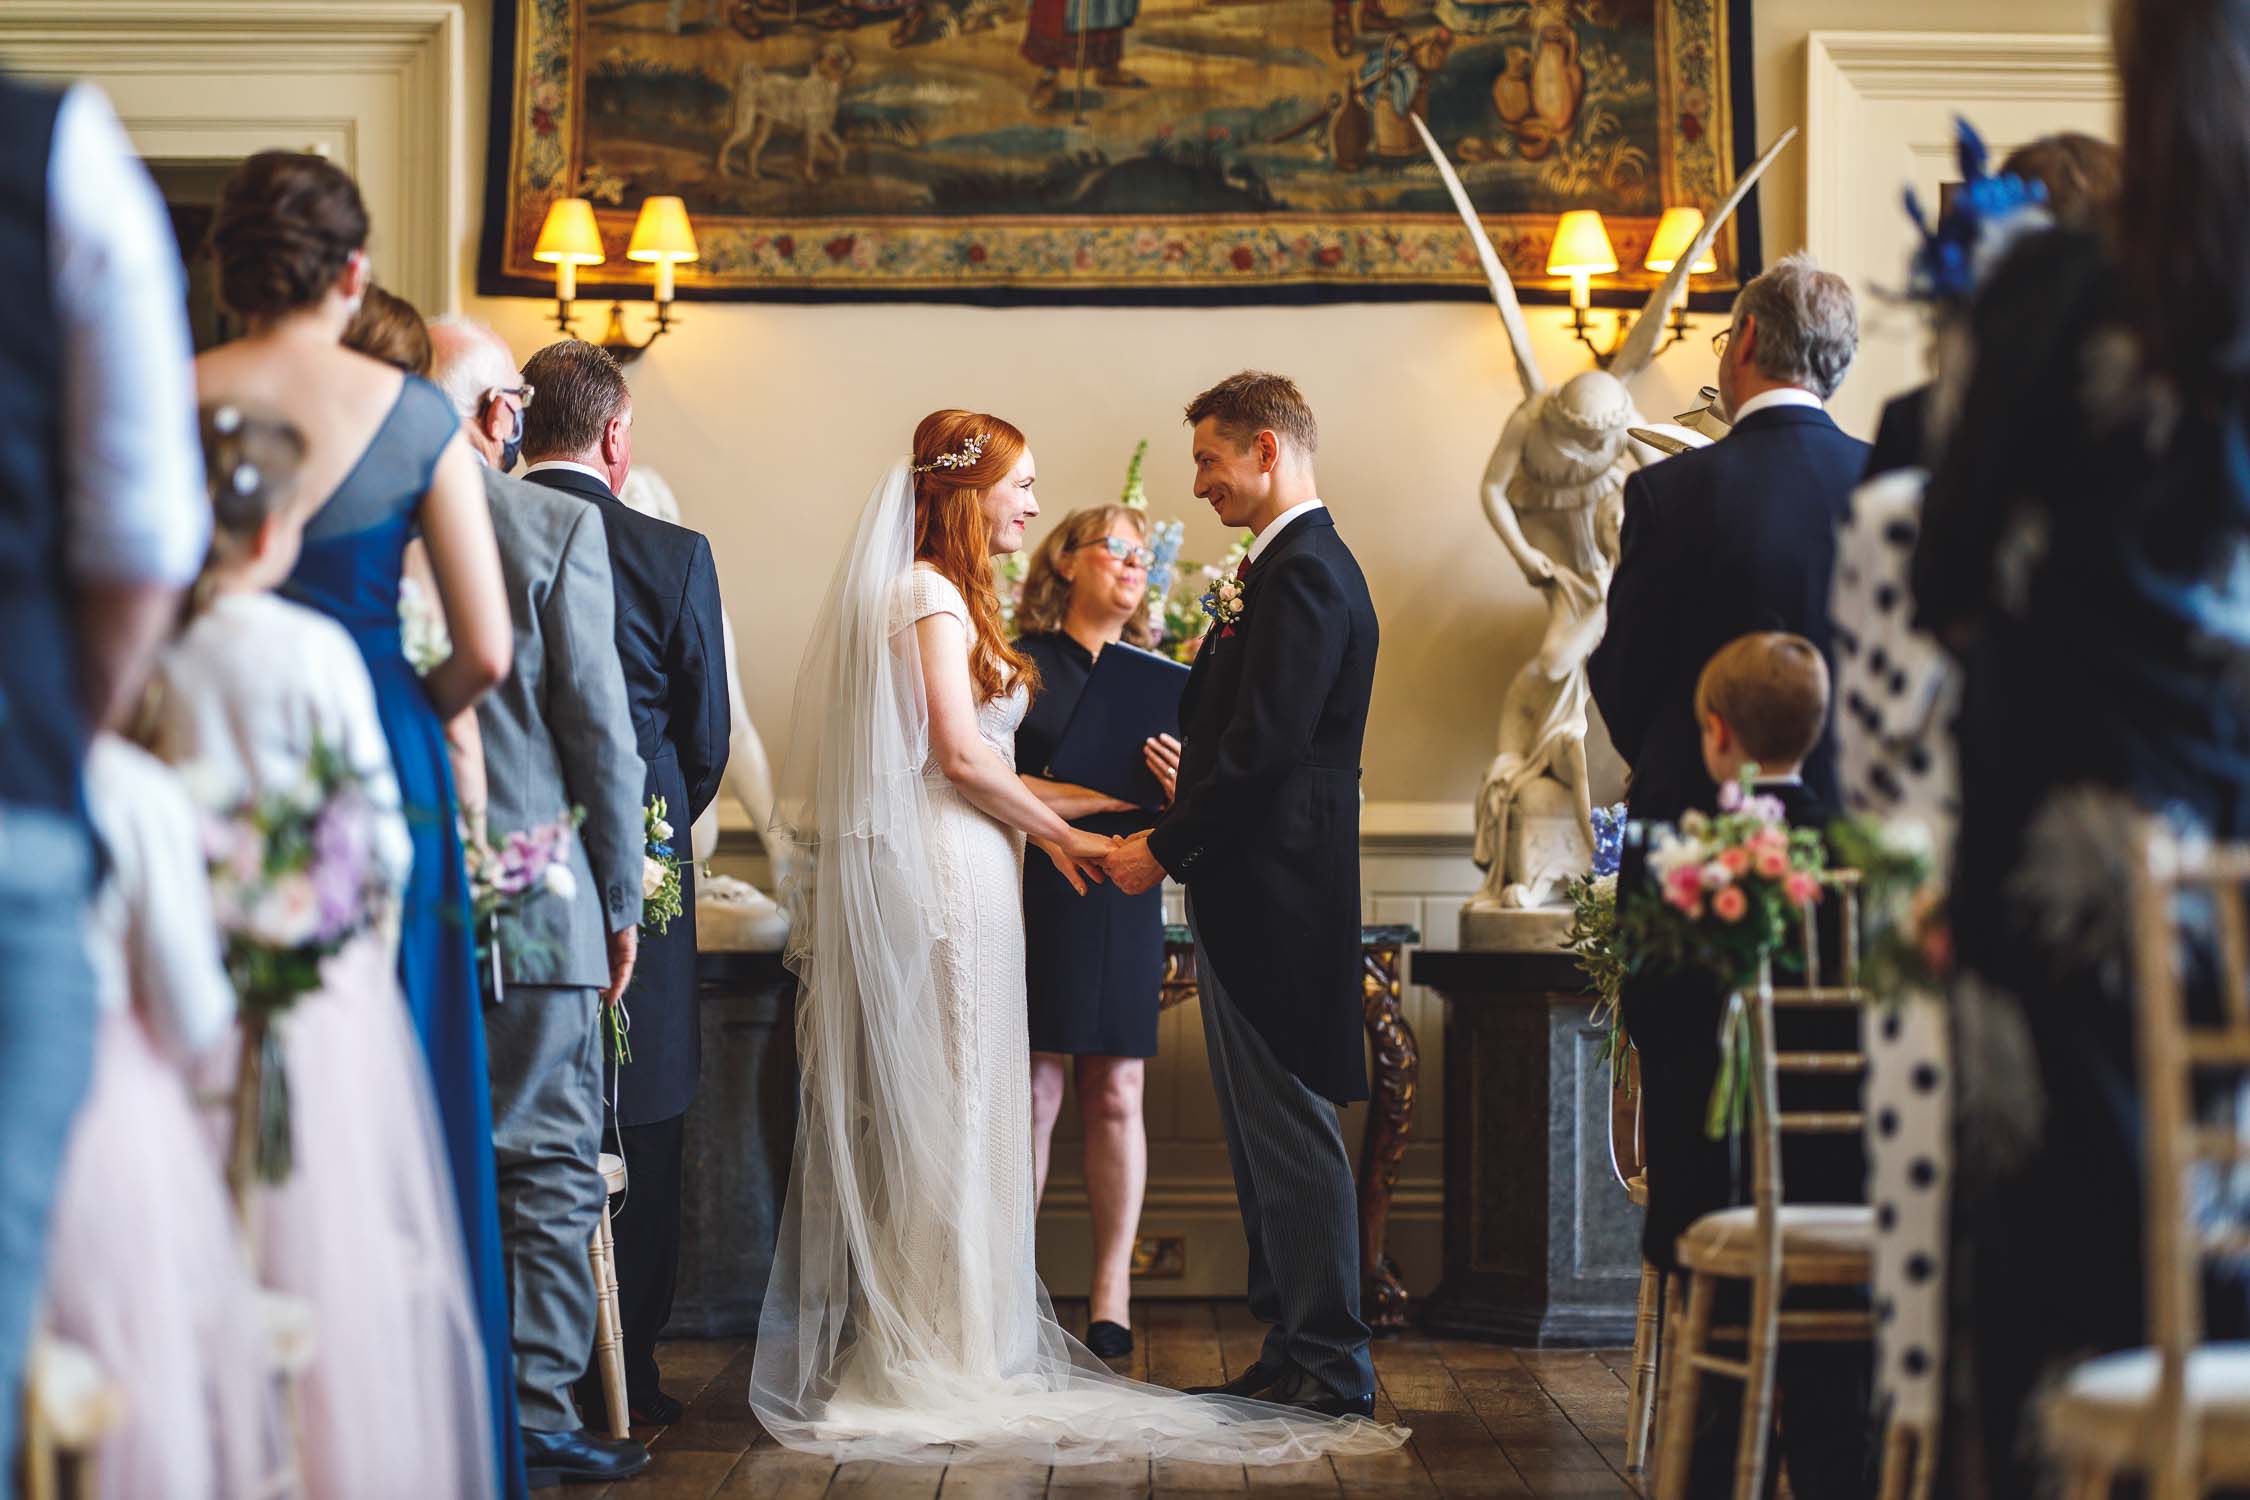 Wedding ceremony at Elmore Court in Gloucestershire